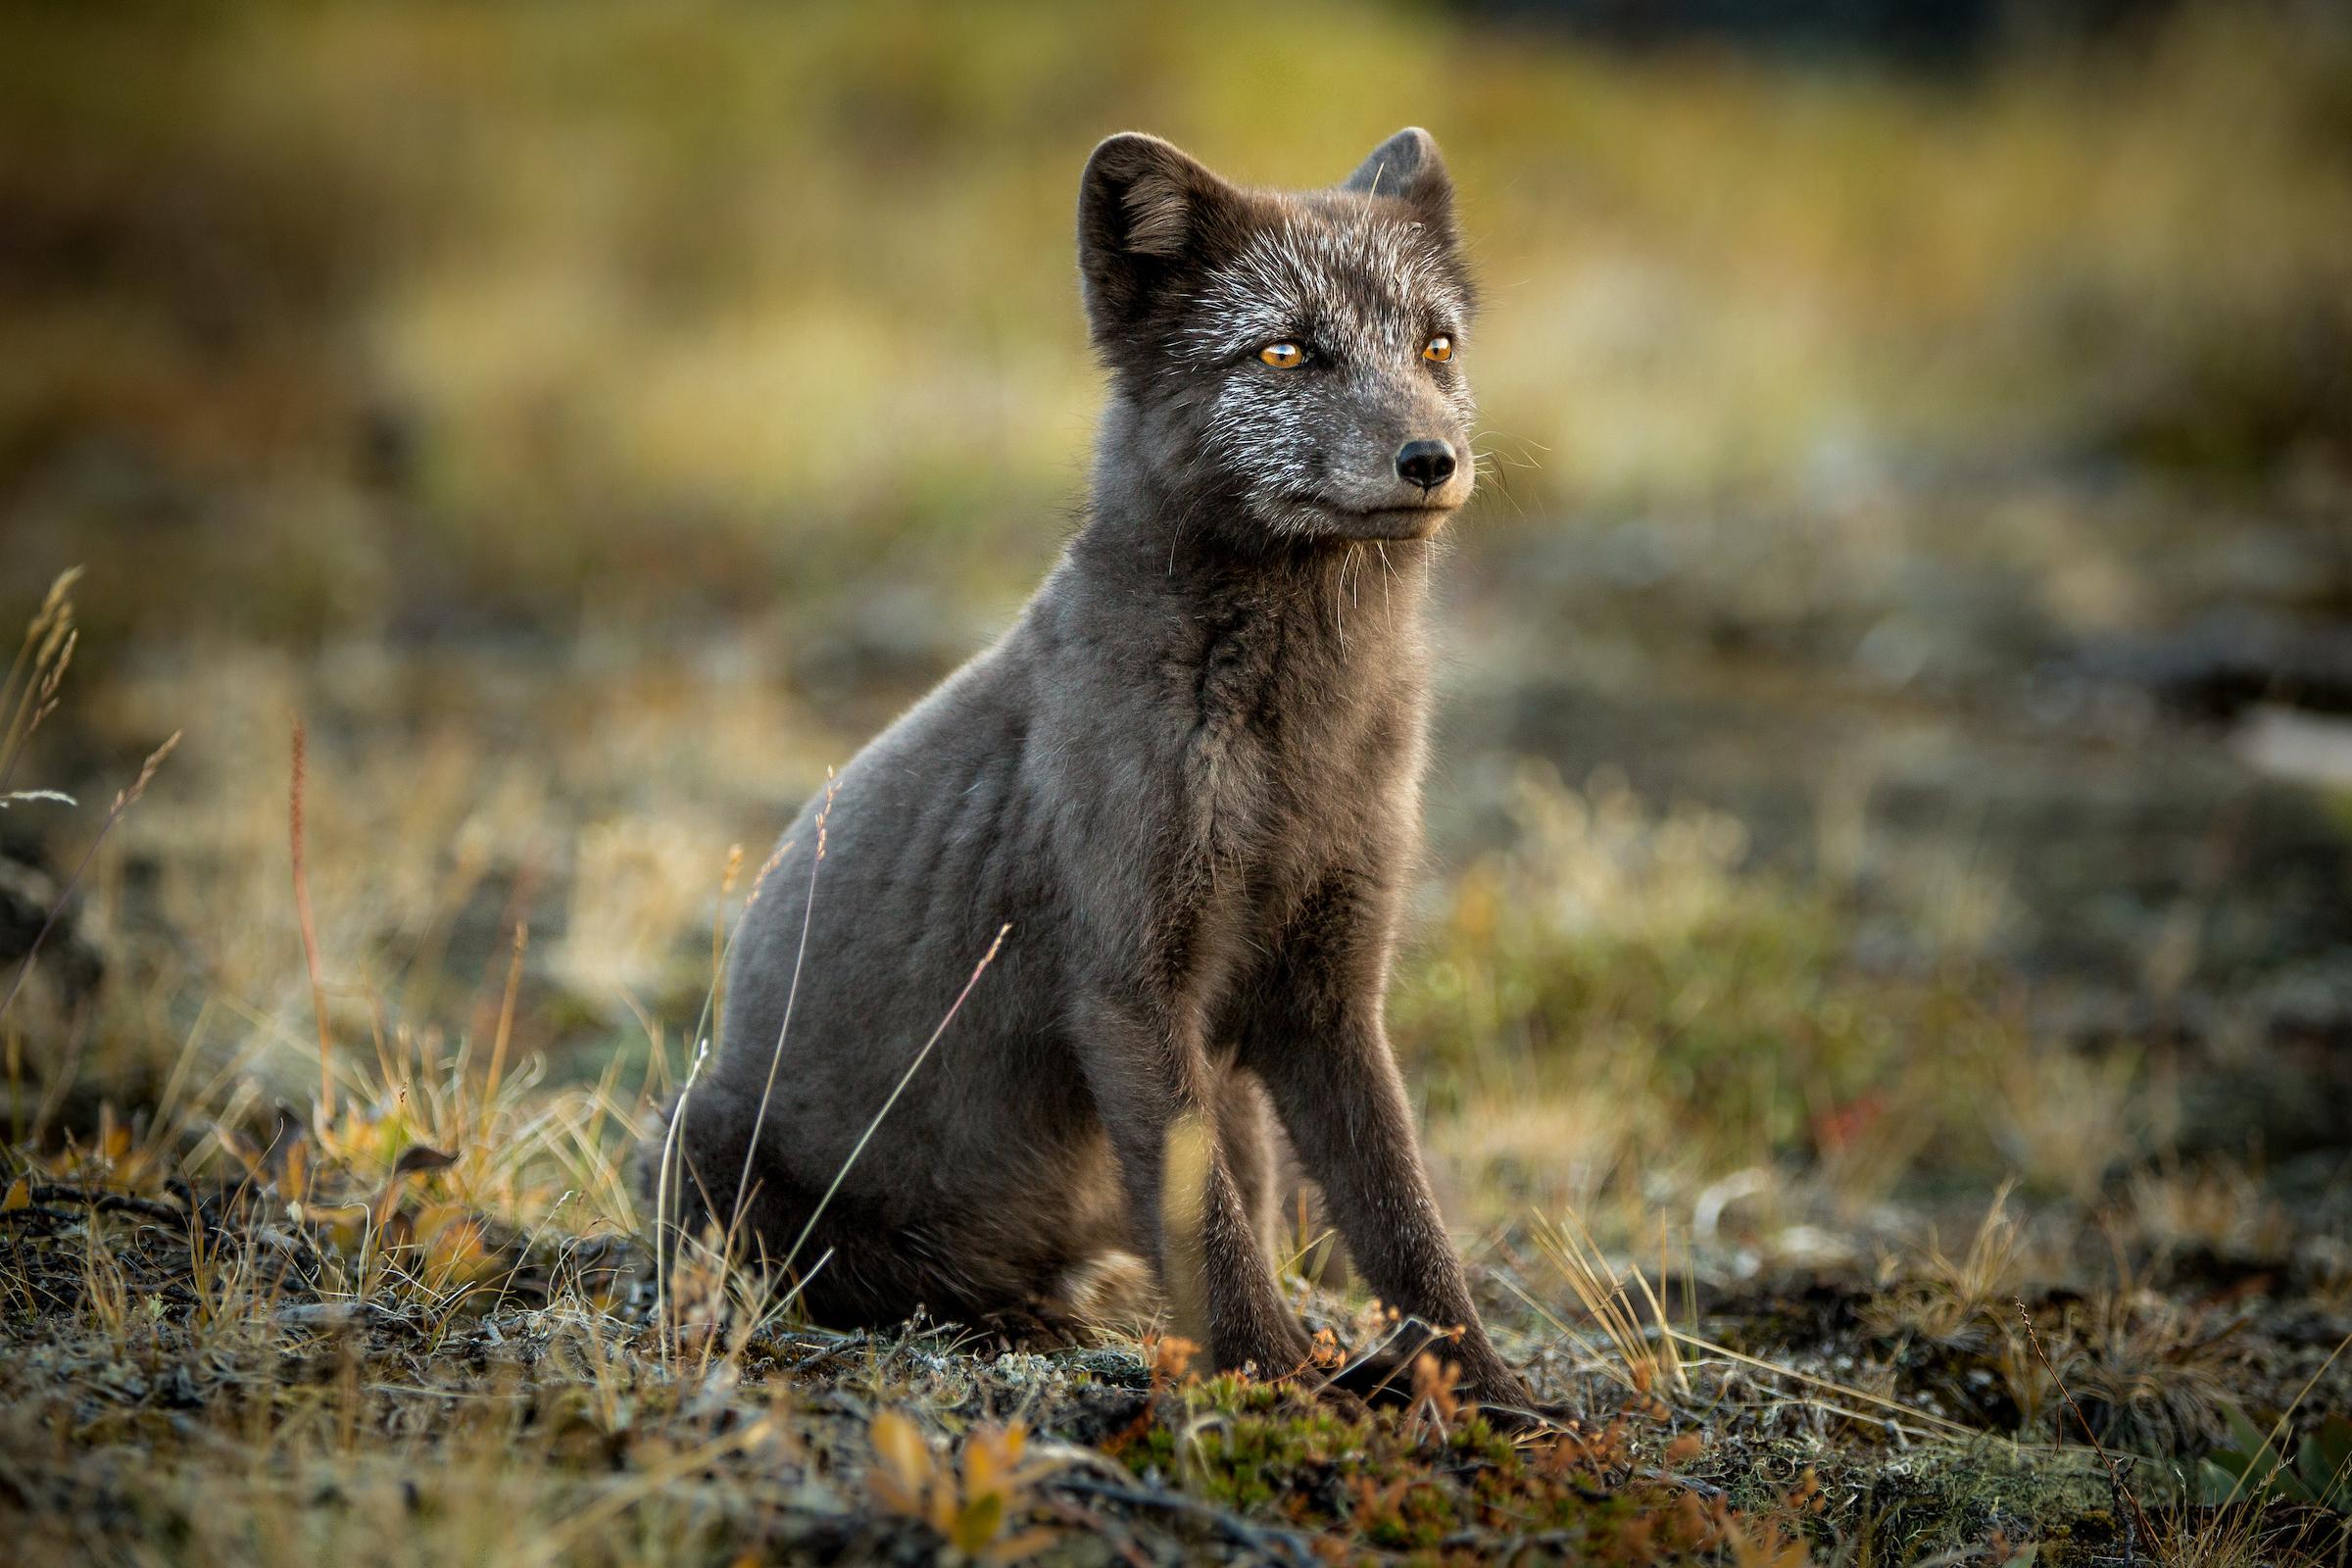 Arctic foxes are incredibly hardy animals that can survive temperatures as low as -50C.